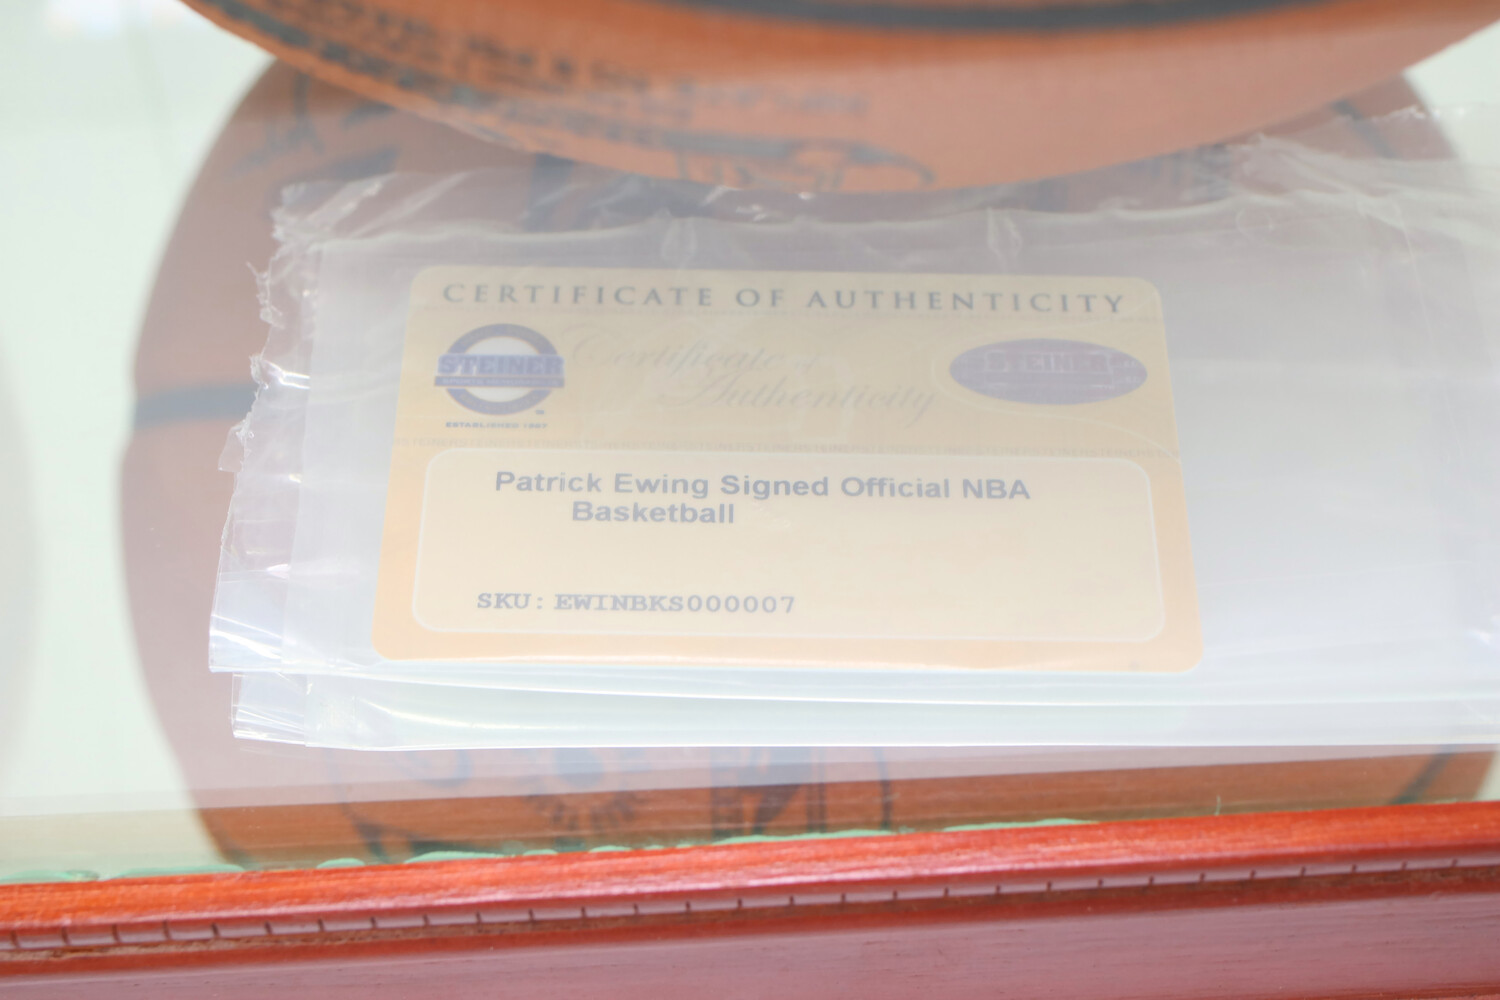 Patrick Ewing Signed Official NBA Knicks Game Ball In Display Case Steiner COA